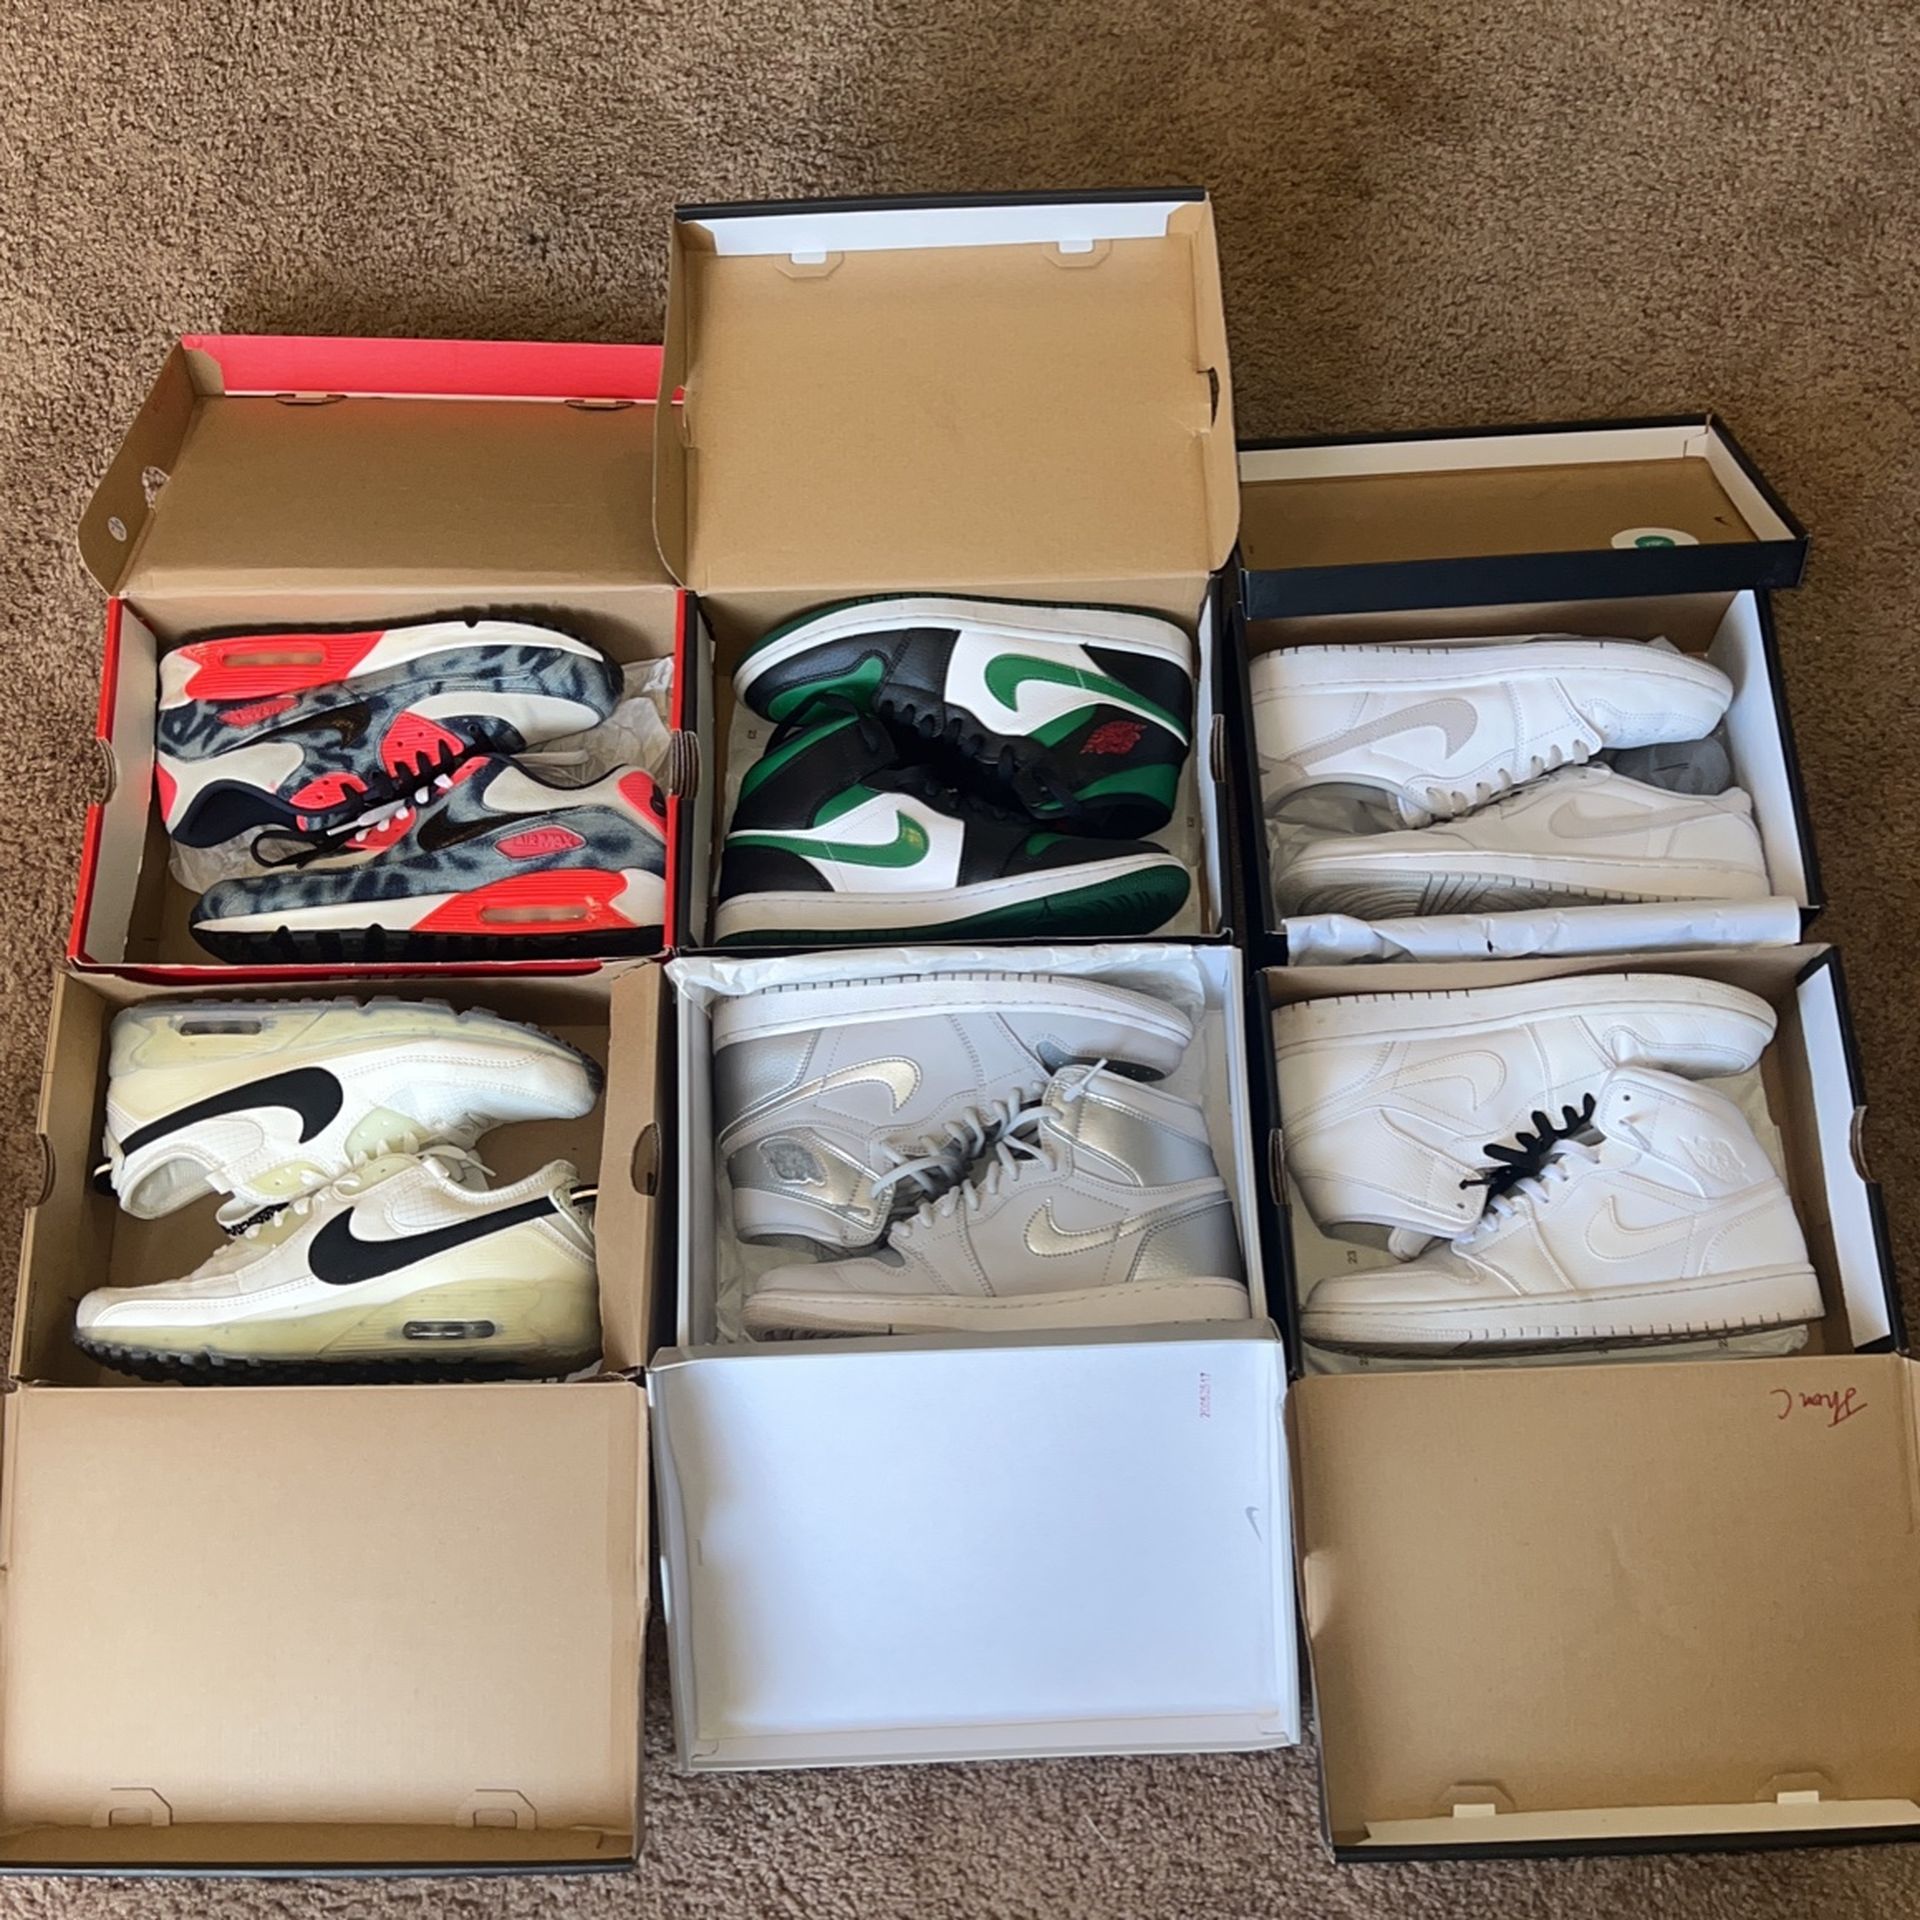 Jordan 1s / Nike Air Max 90s Size 8.5M $75 For All